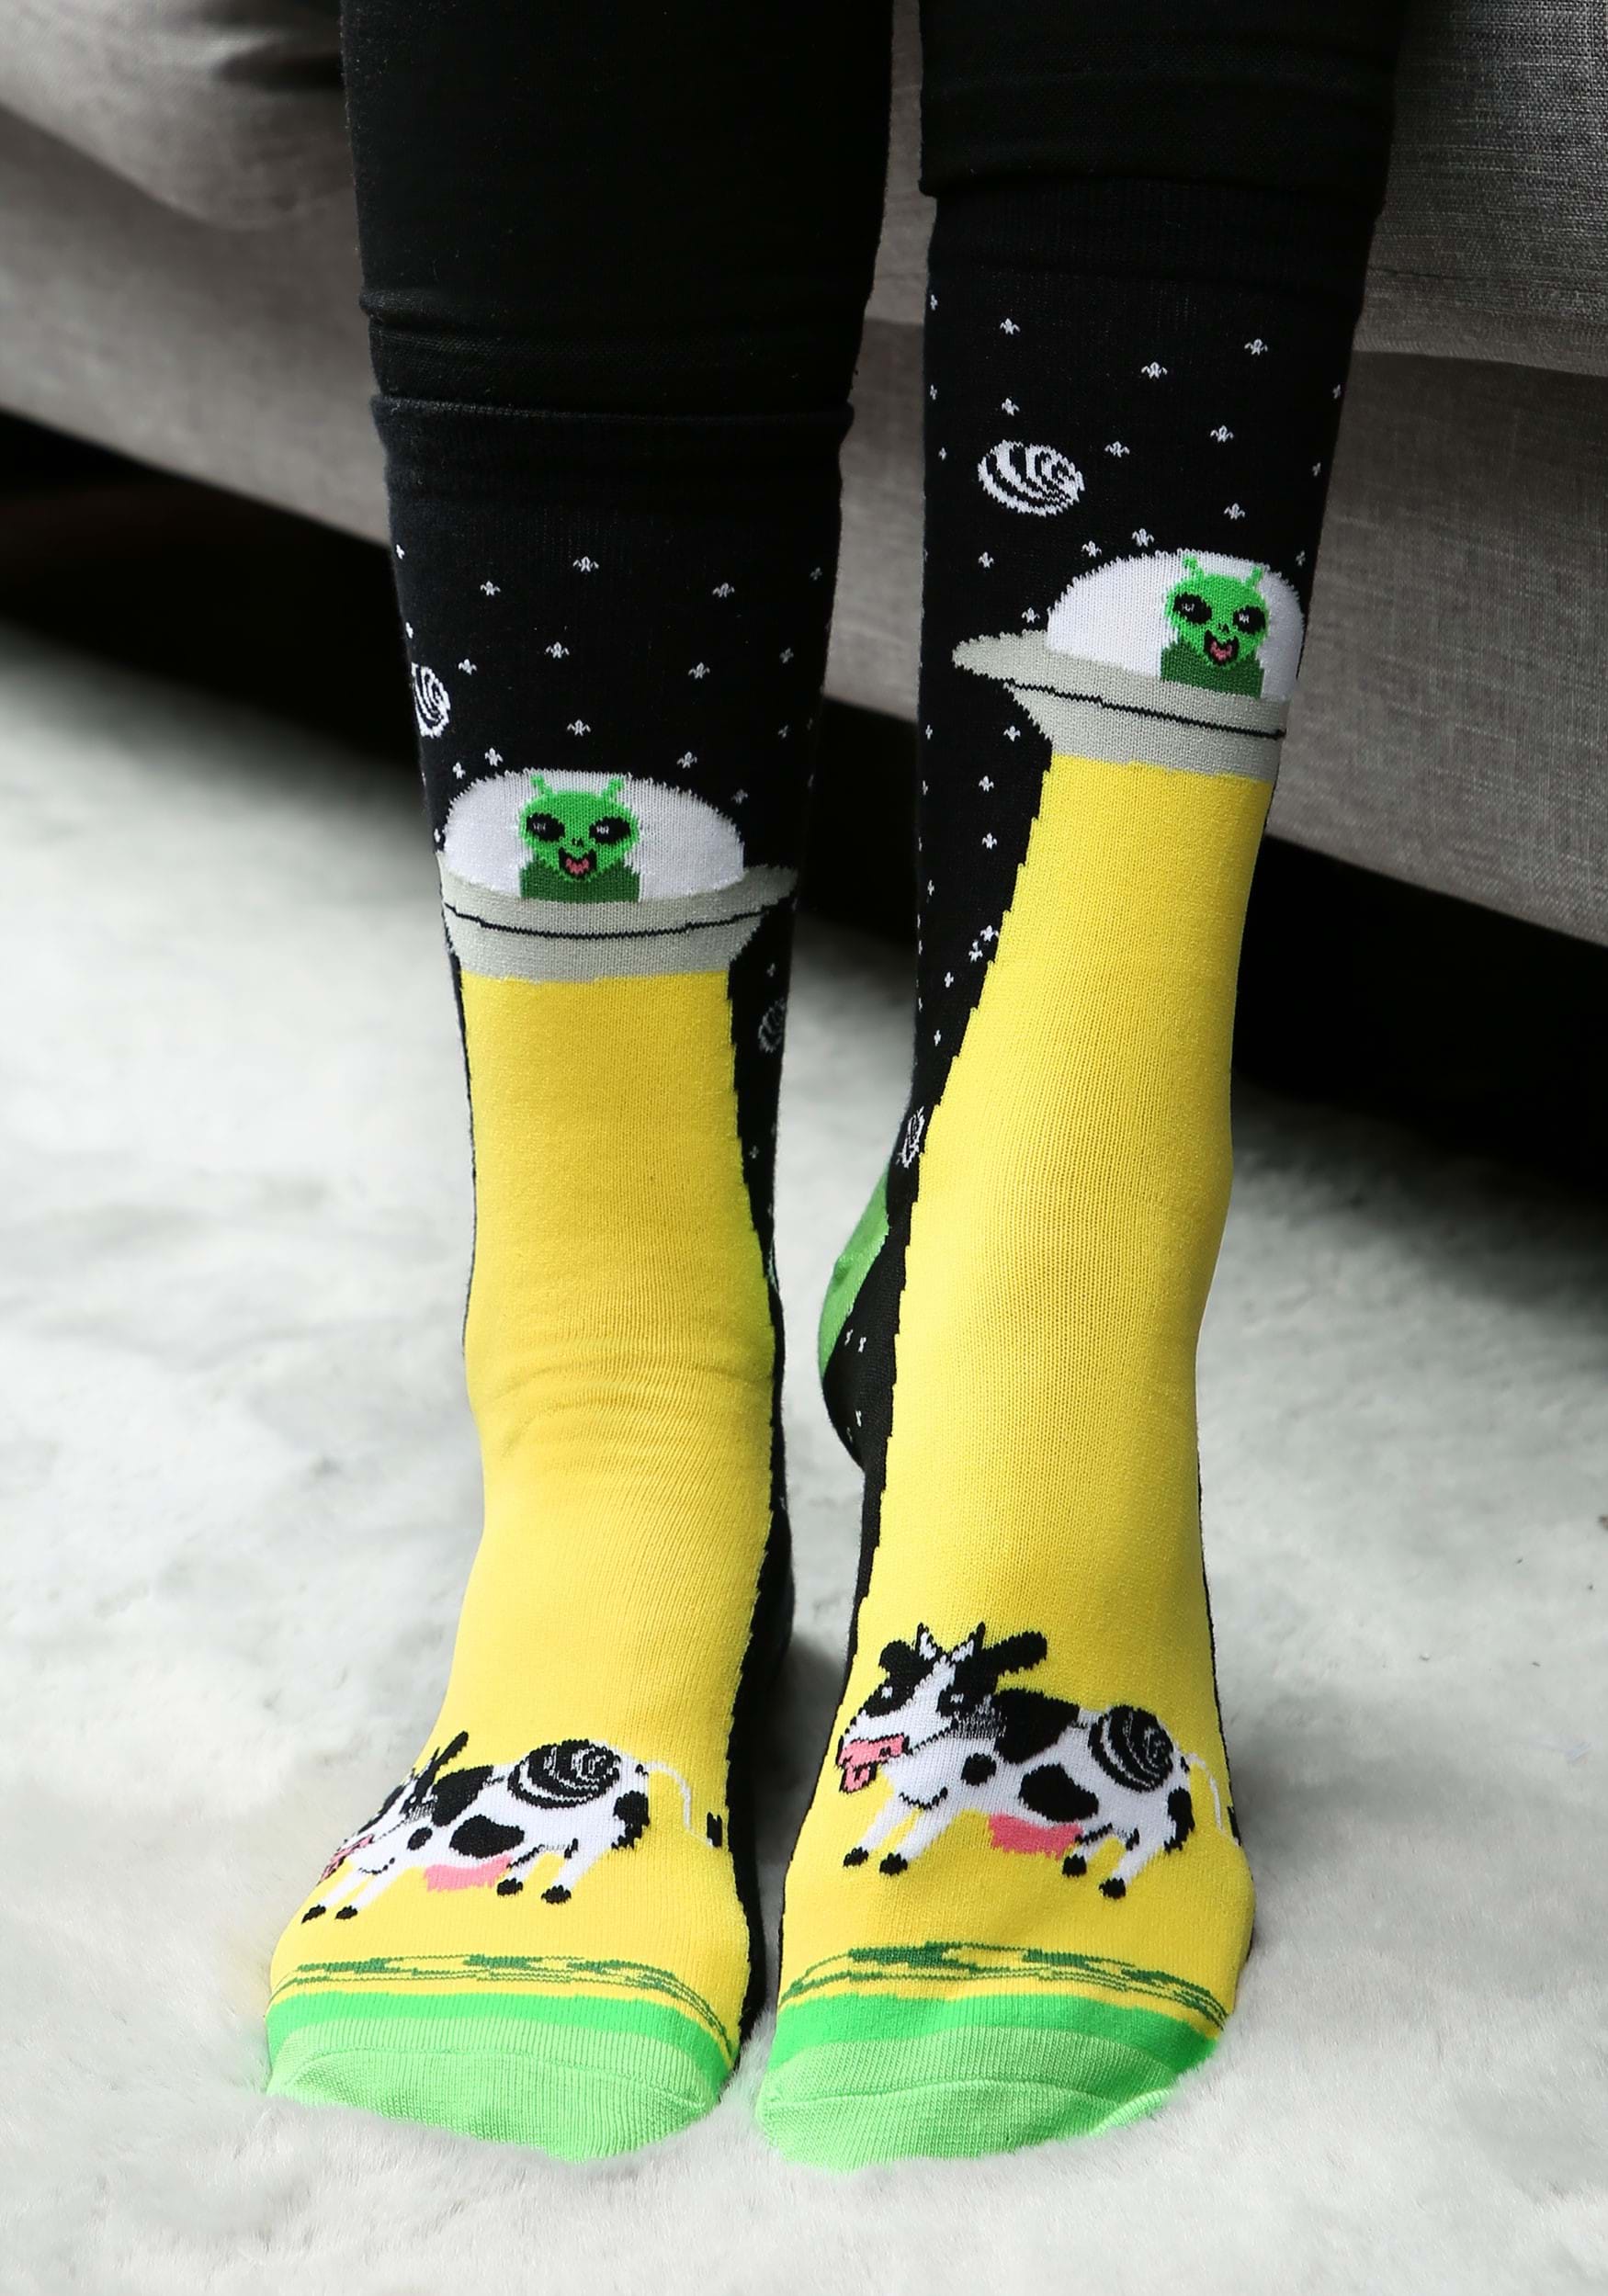 Cow Abducted by Aliens Socks | Funny Halloween Socks